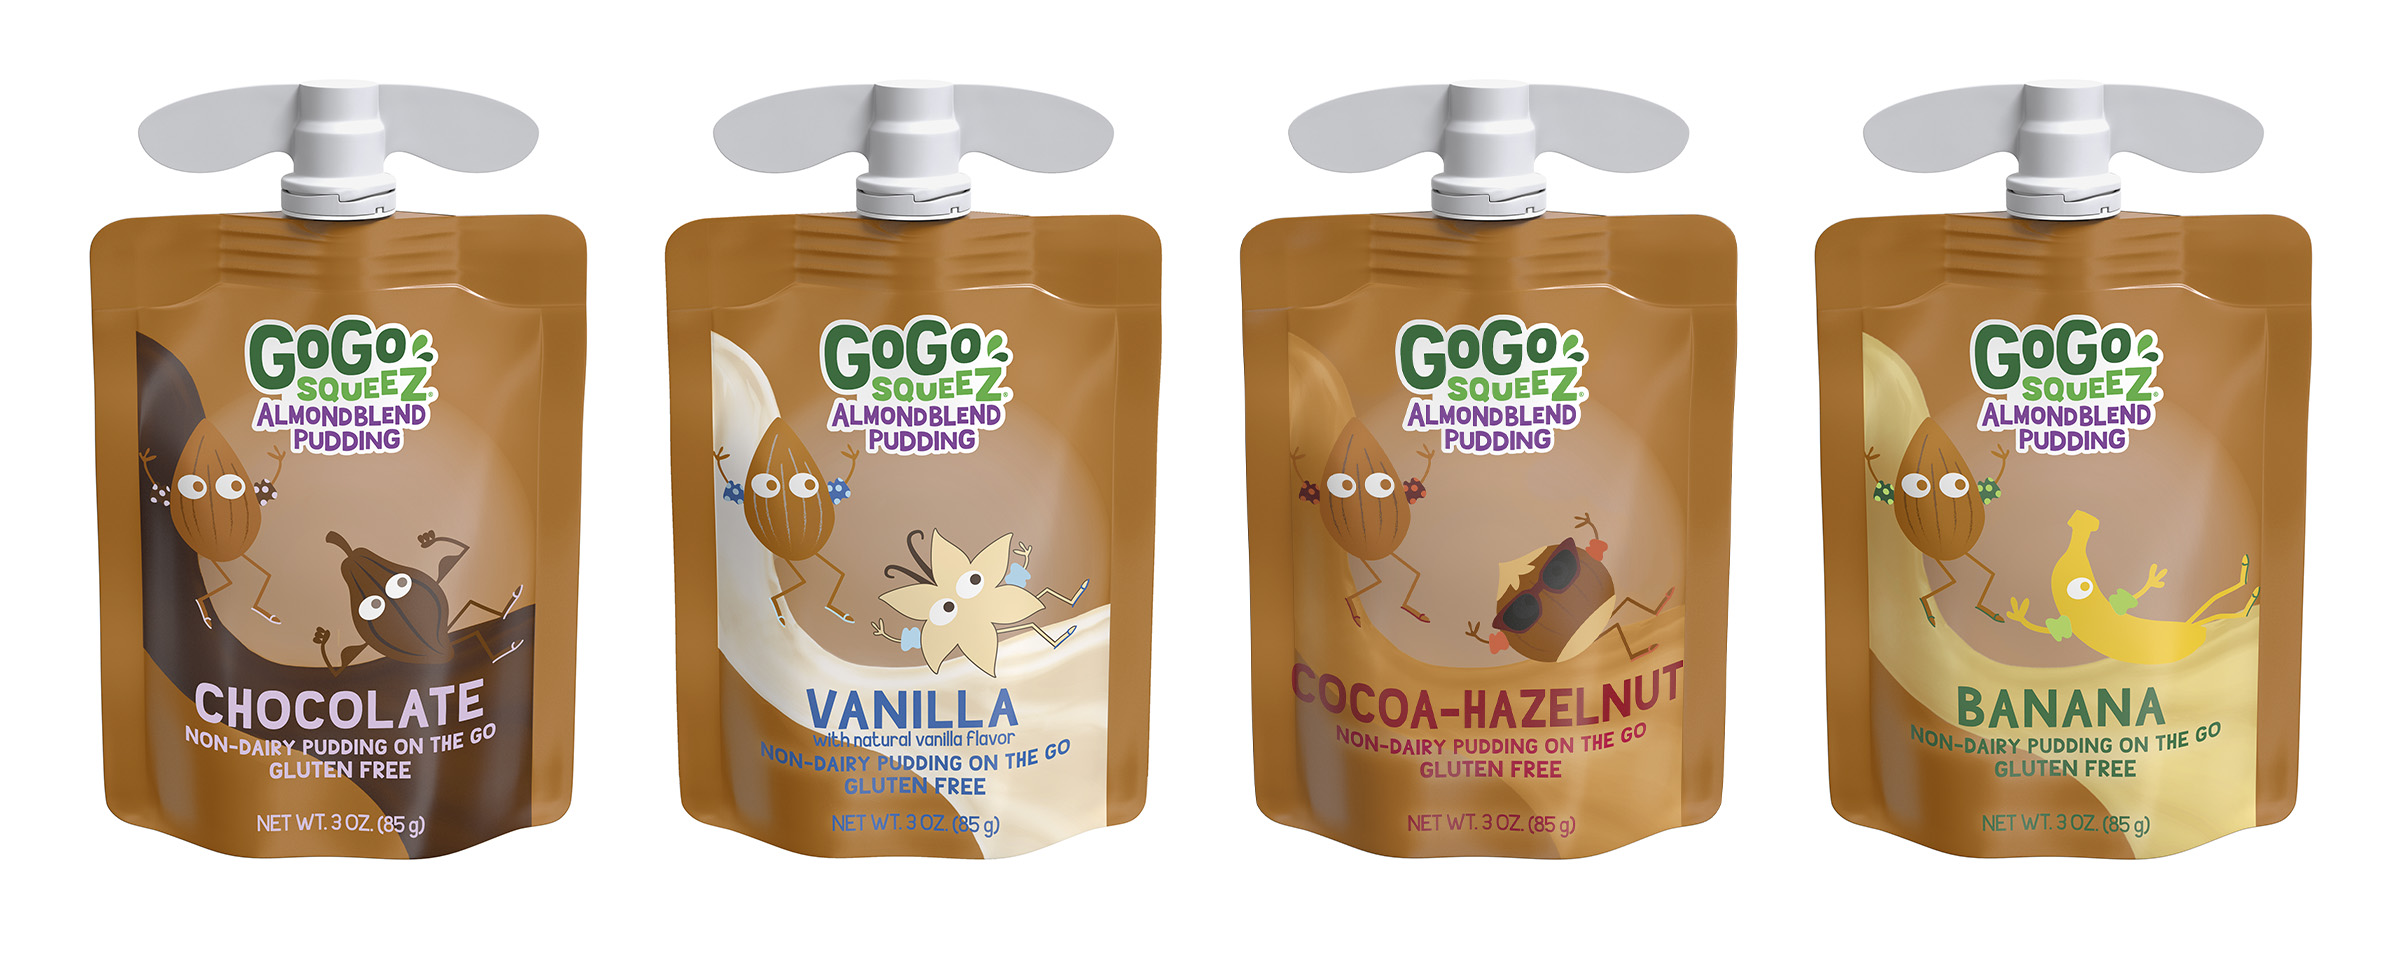 First Ever Plant Based Pudding In A Pouch Introducing New Gogo Squeez